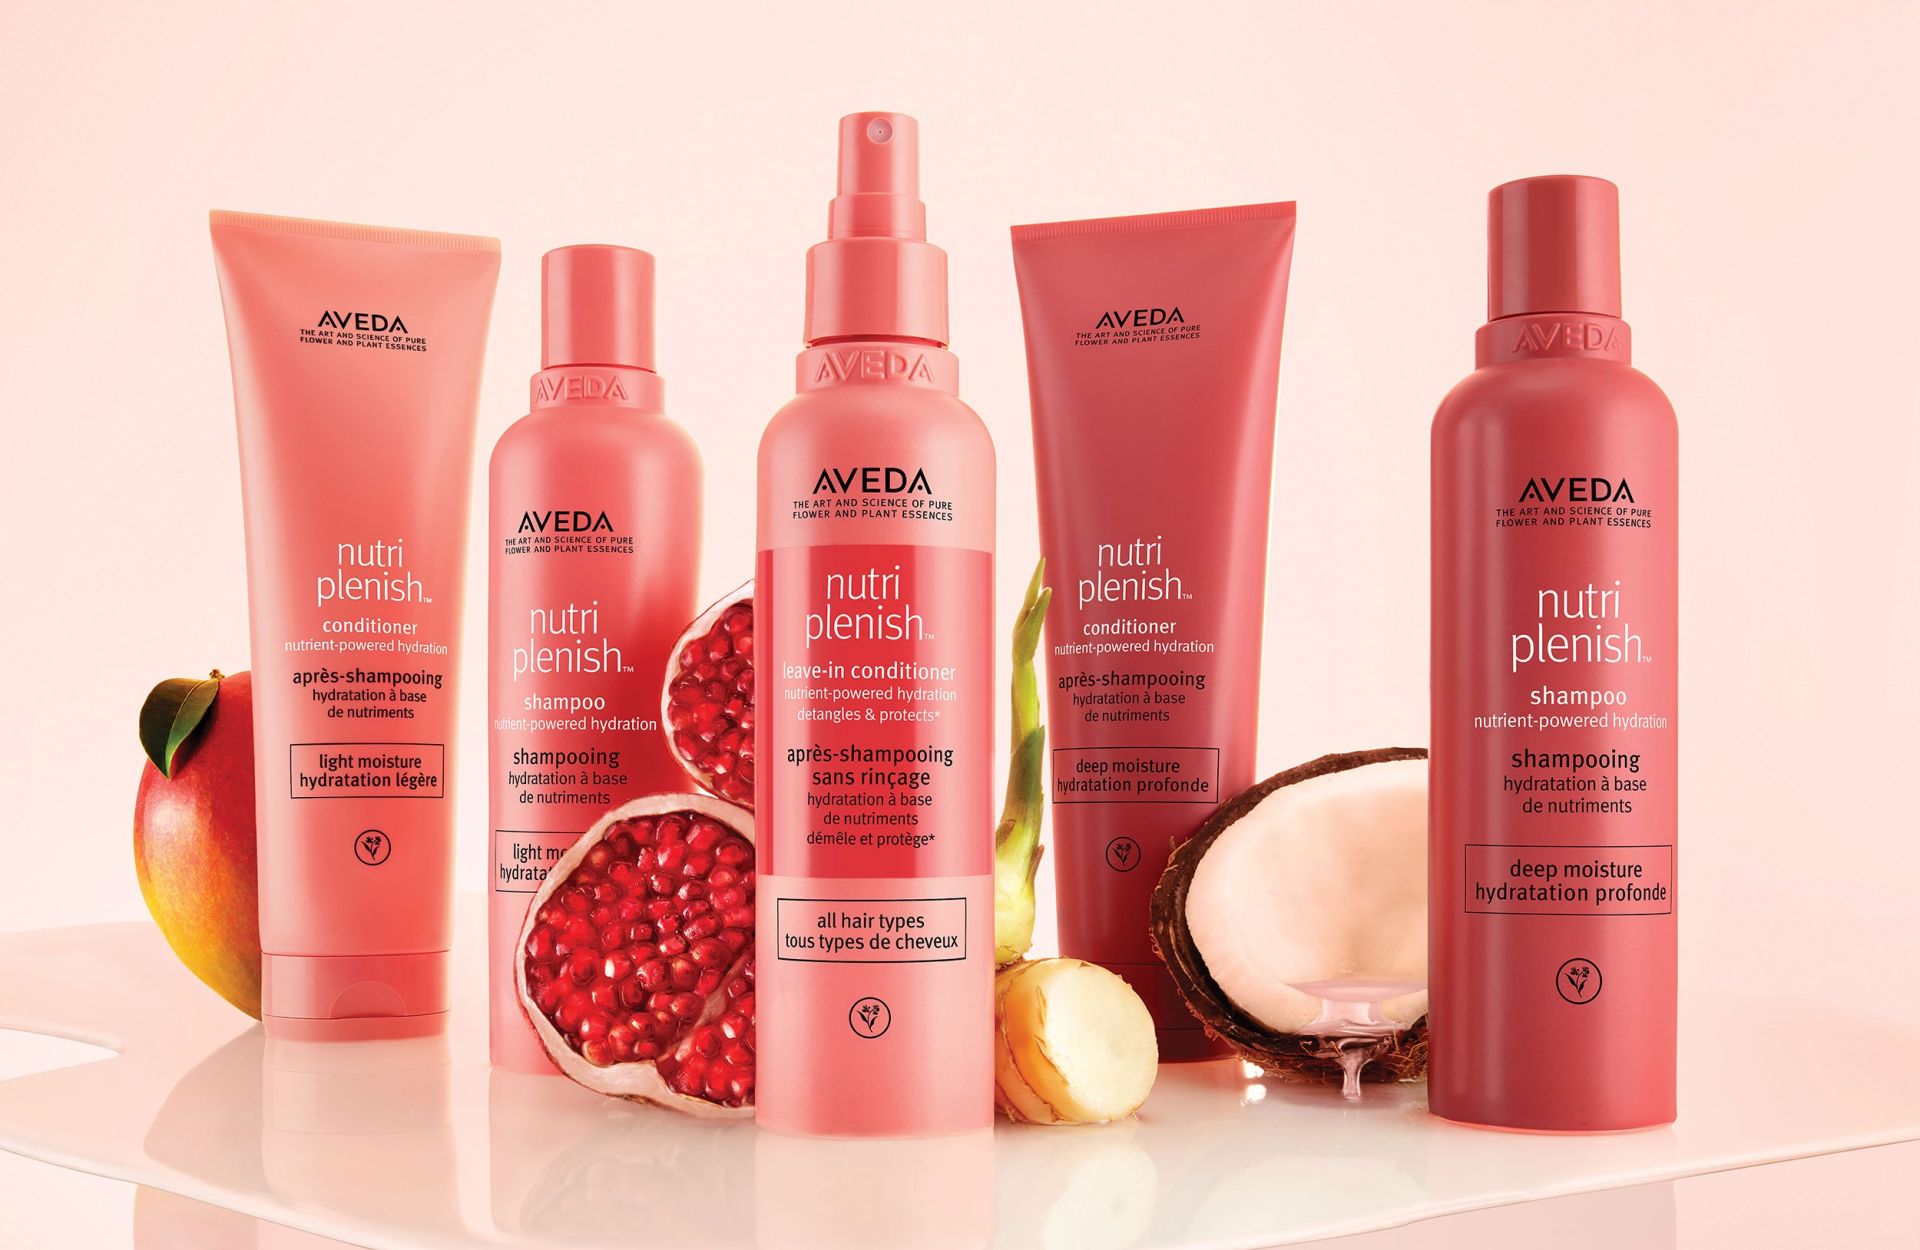 Teachers and students save 20% on Aveda products.